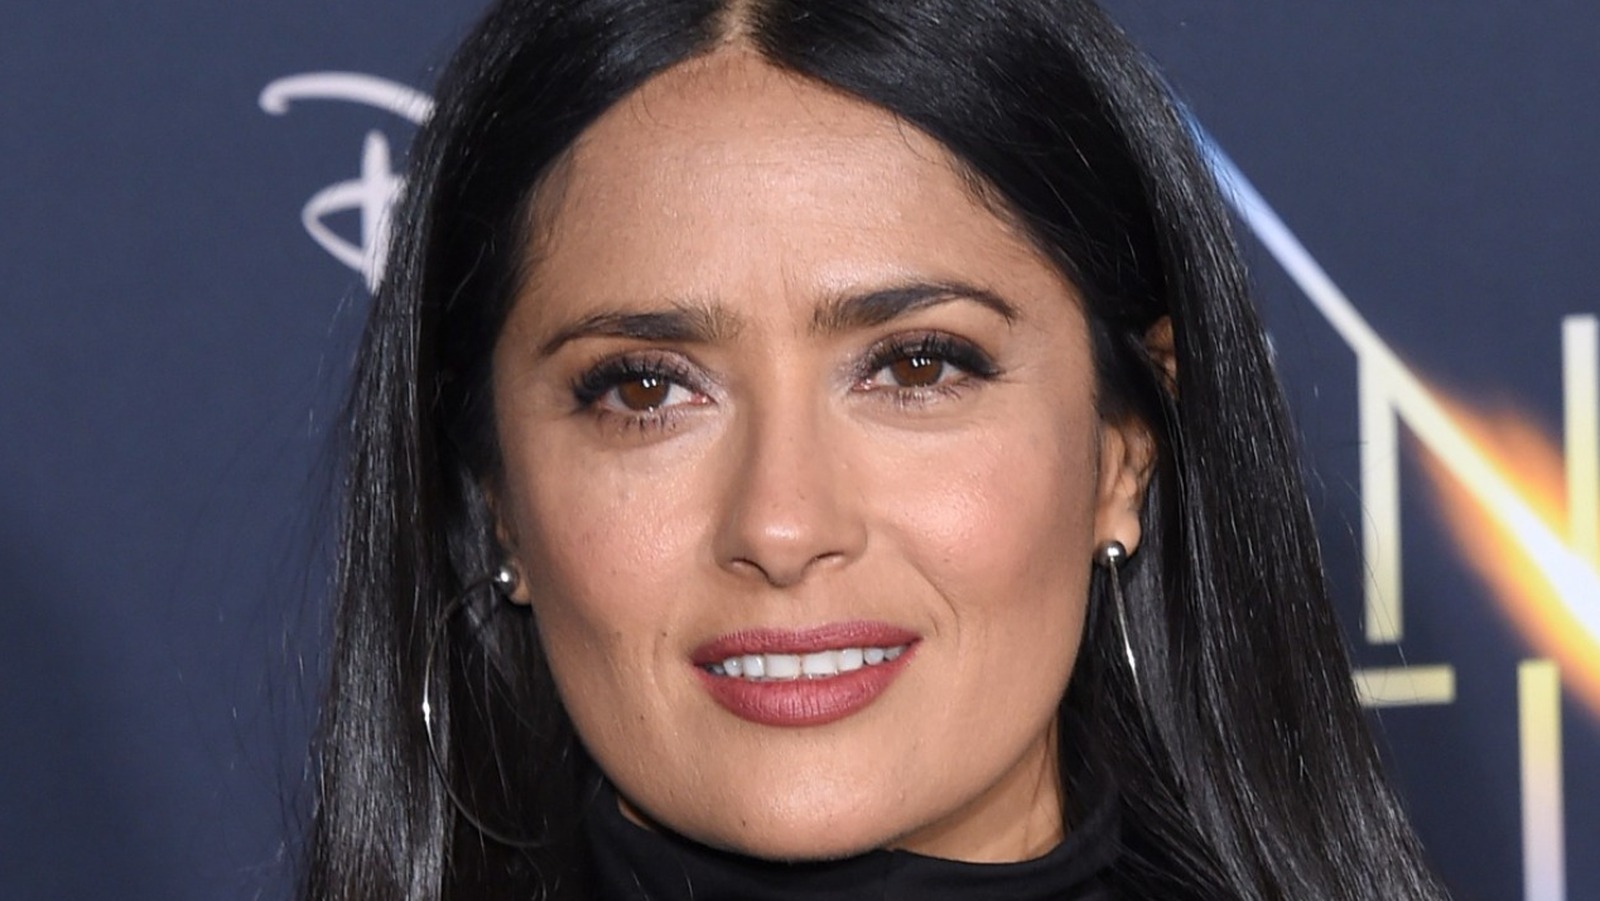 Salma Hayek's new project 'A Boob's Life' in works at HBO Max